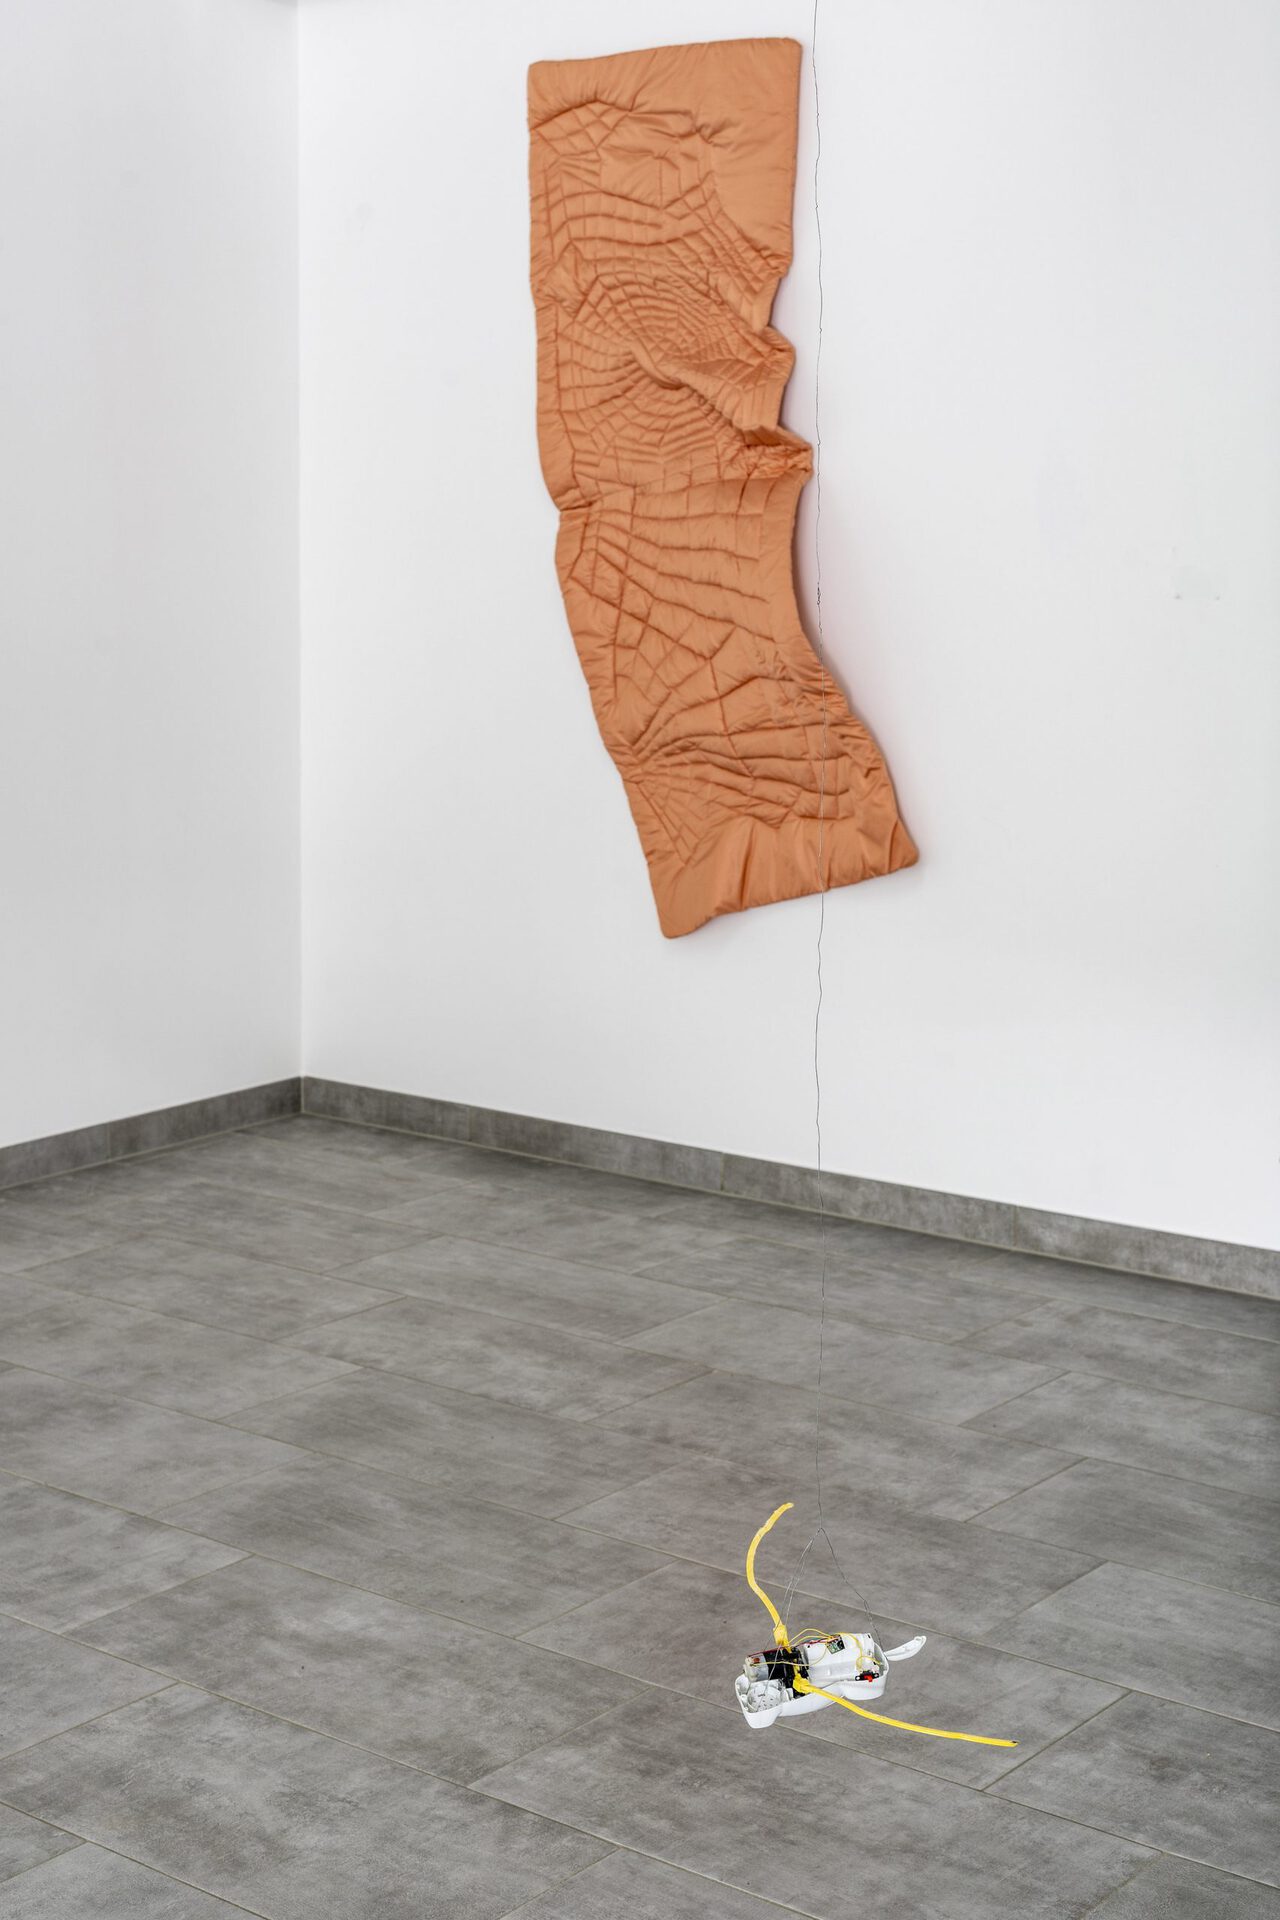 Laura Franzmann, Crawling (confusing what is real) 2017, quilted PE-fabric, wadding Ylena Katkova, Bird Without Wings, 2021, kinetic object Photo: Helge Mundt